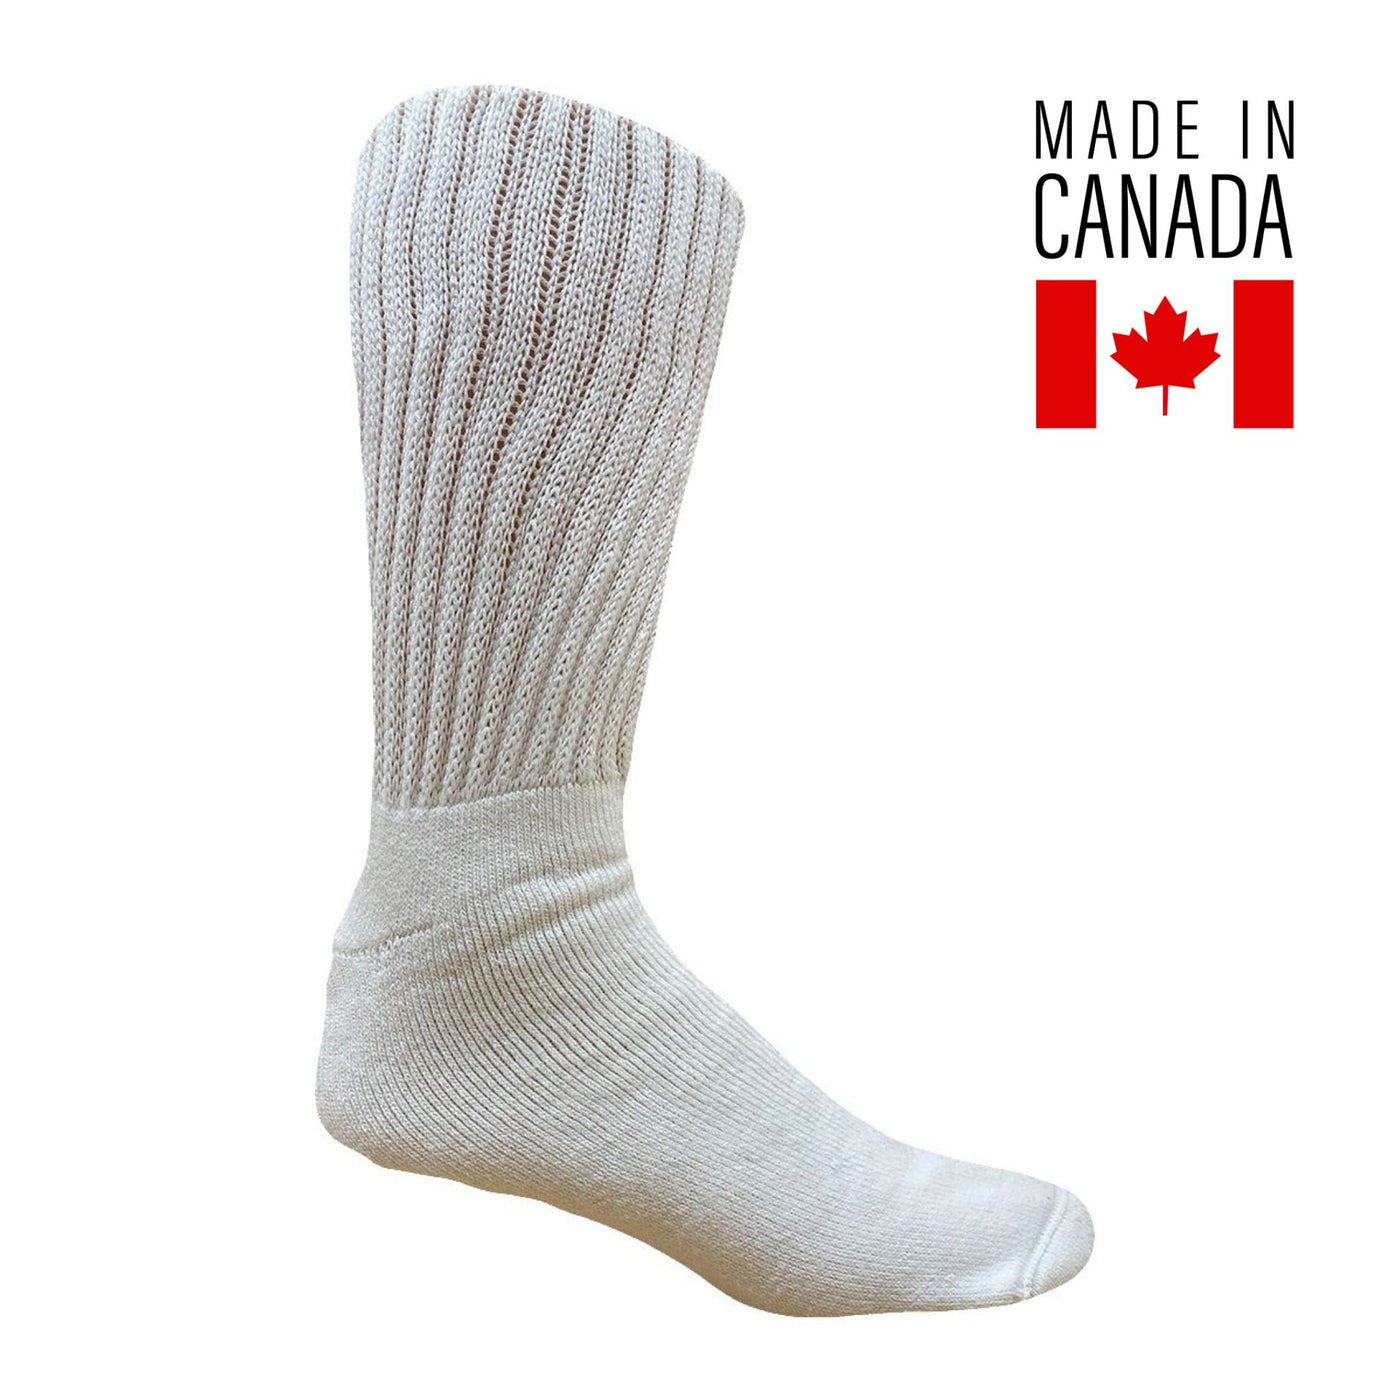 3 PAIR - X-Large Everyday Casual White Sock- CLEARANCE 50% OFF